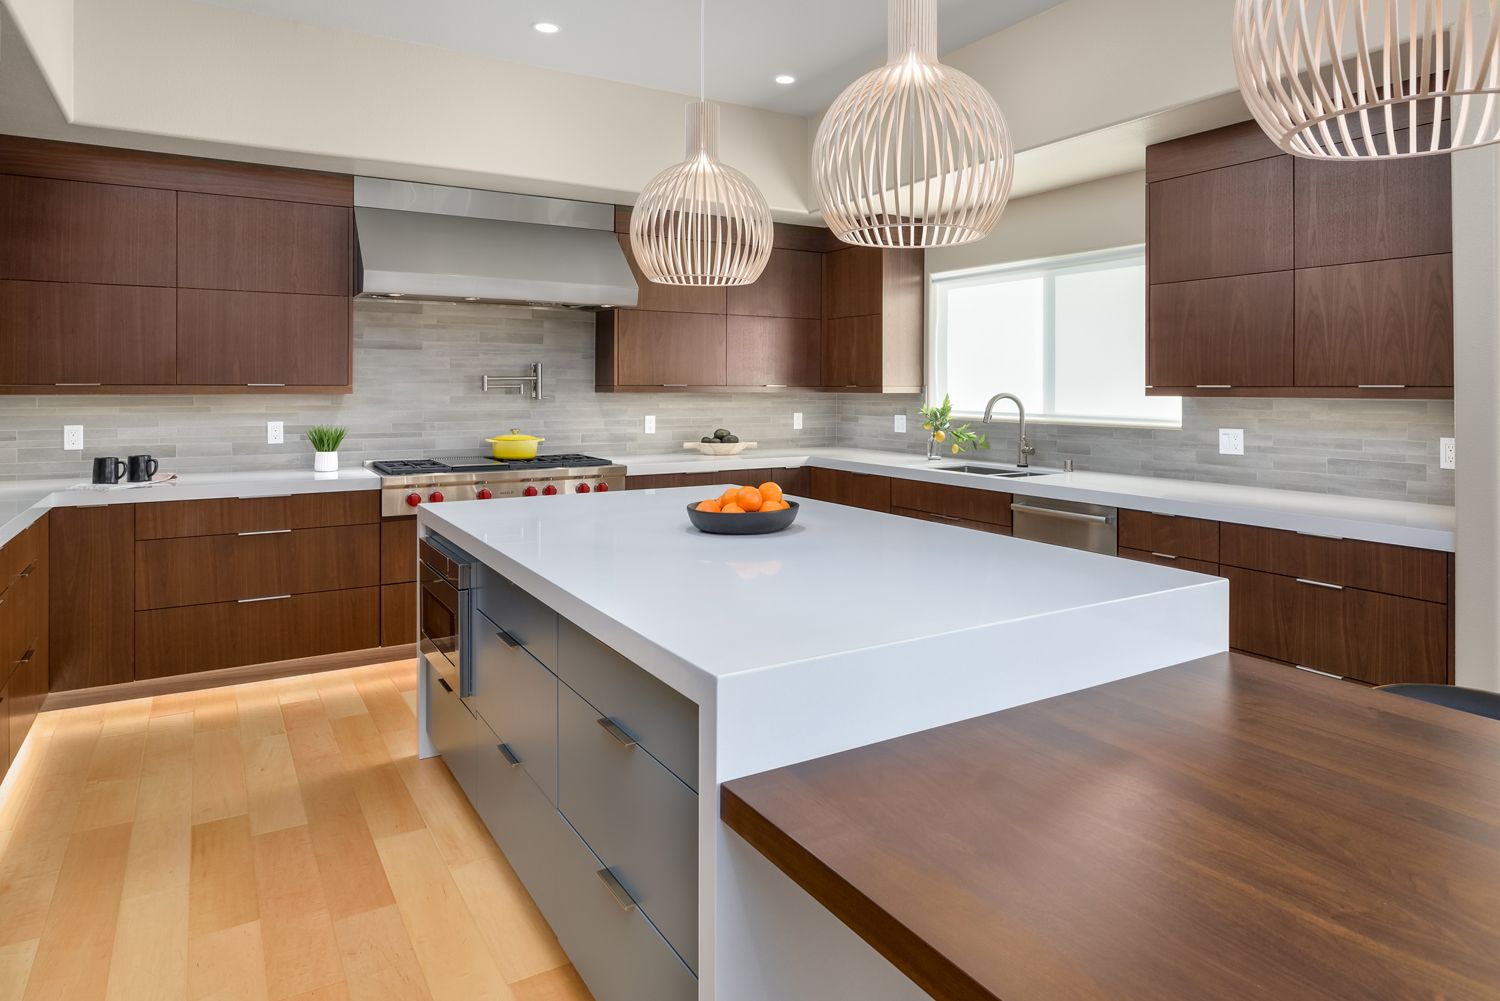 Westside Remodeling is Camarillo, CA’s go-to for homeowners looking to transform their space.